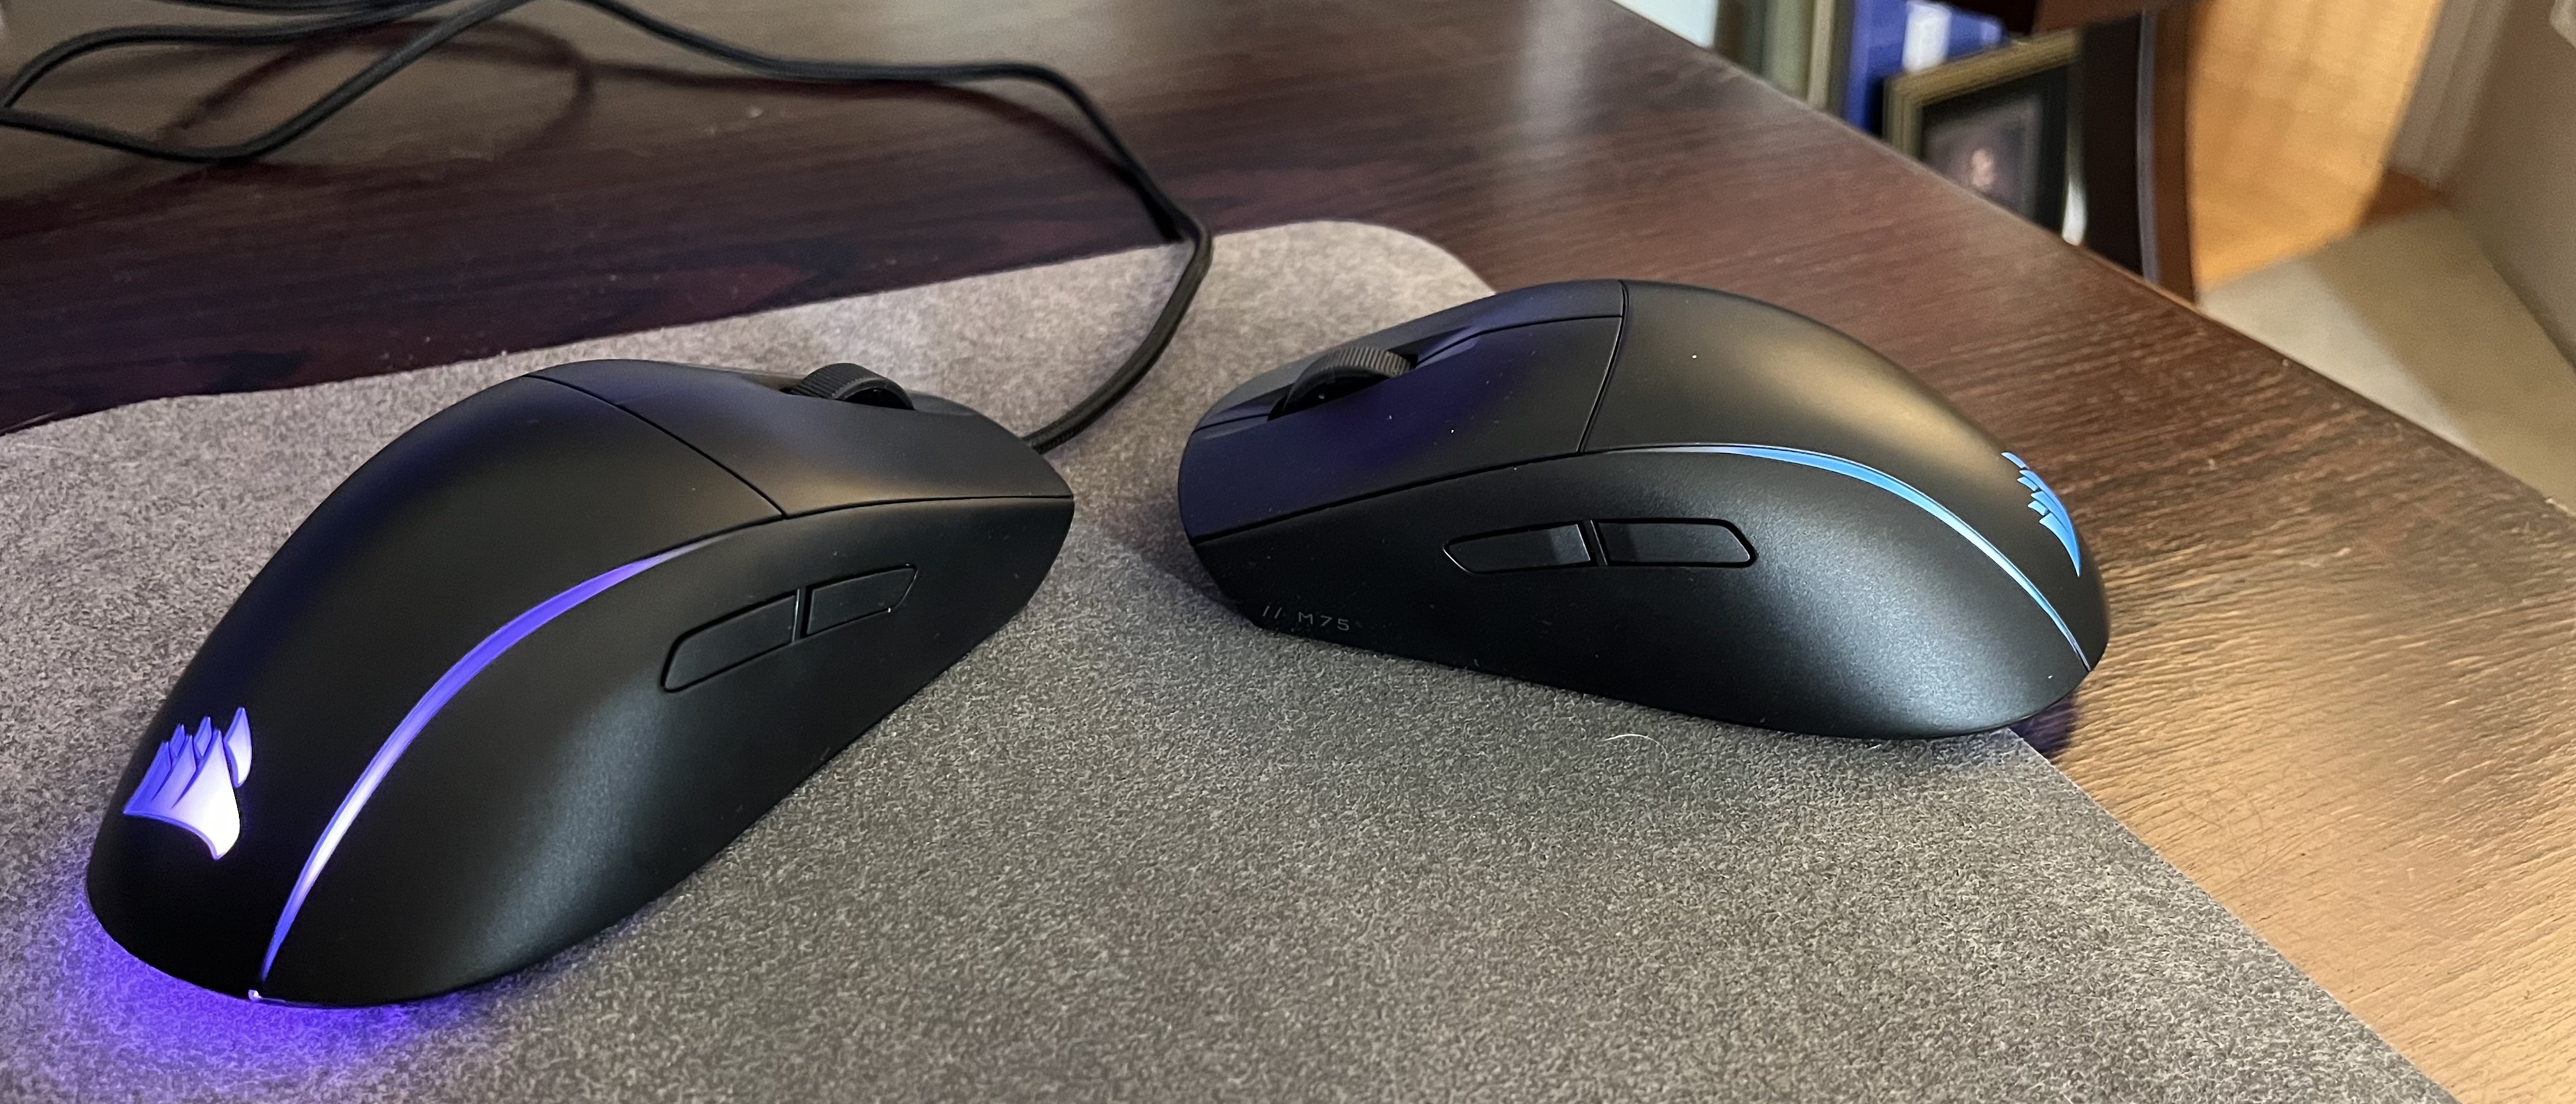 Corsair M75 Wireless compared to the wired Hero model